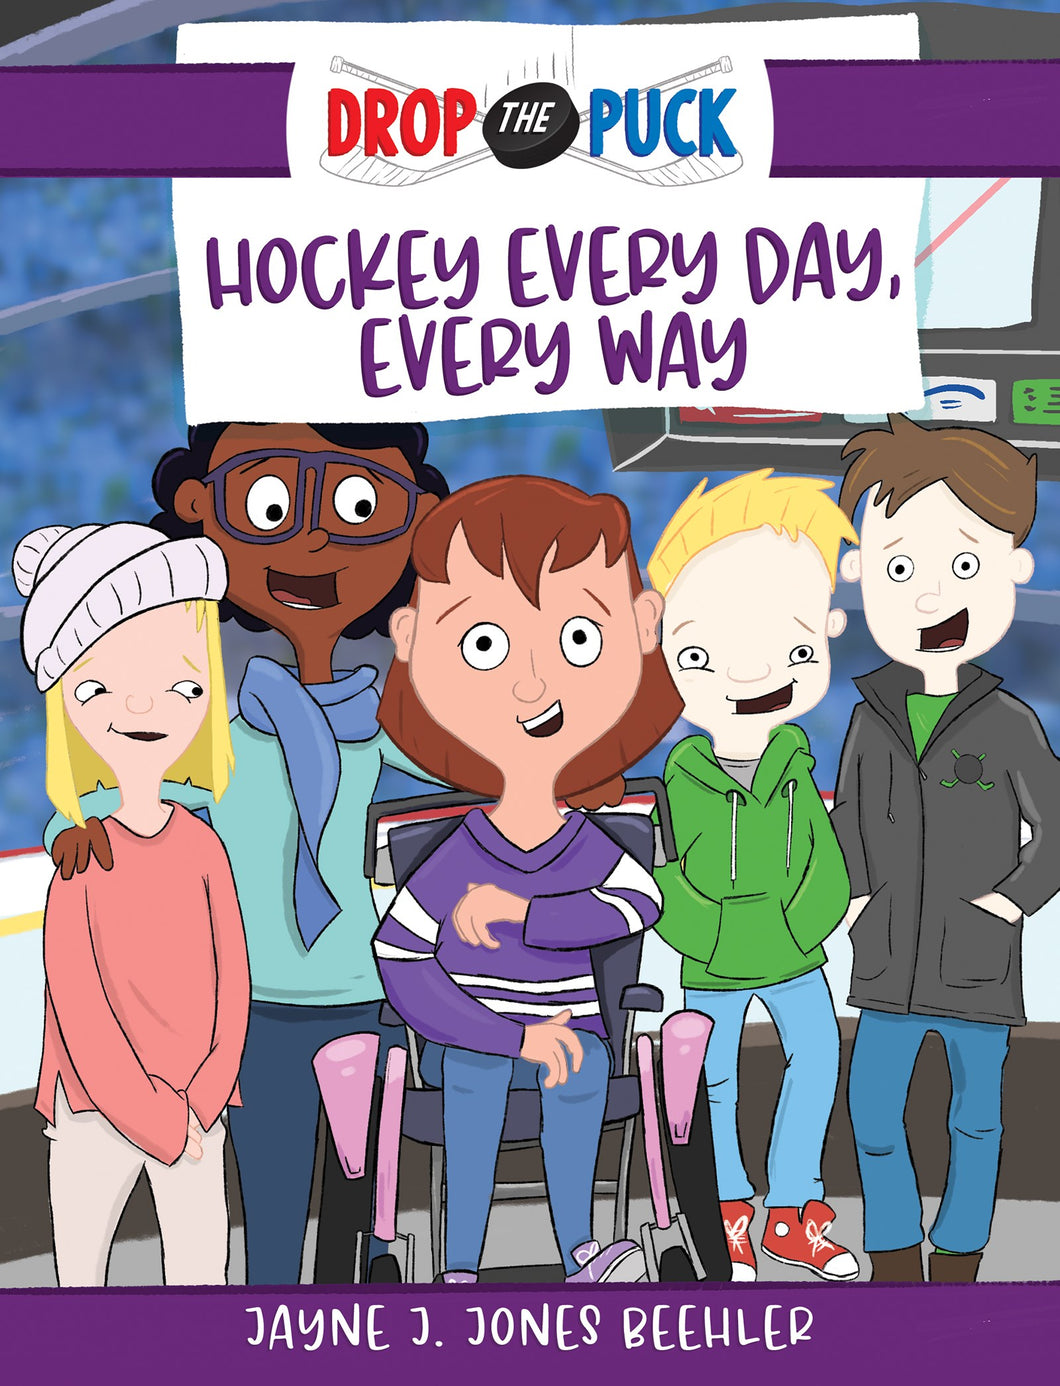 Hockey Every Day Every Way (Drop The Puck V3)